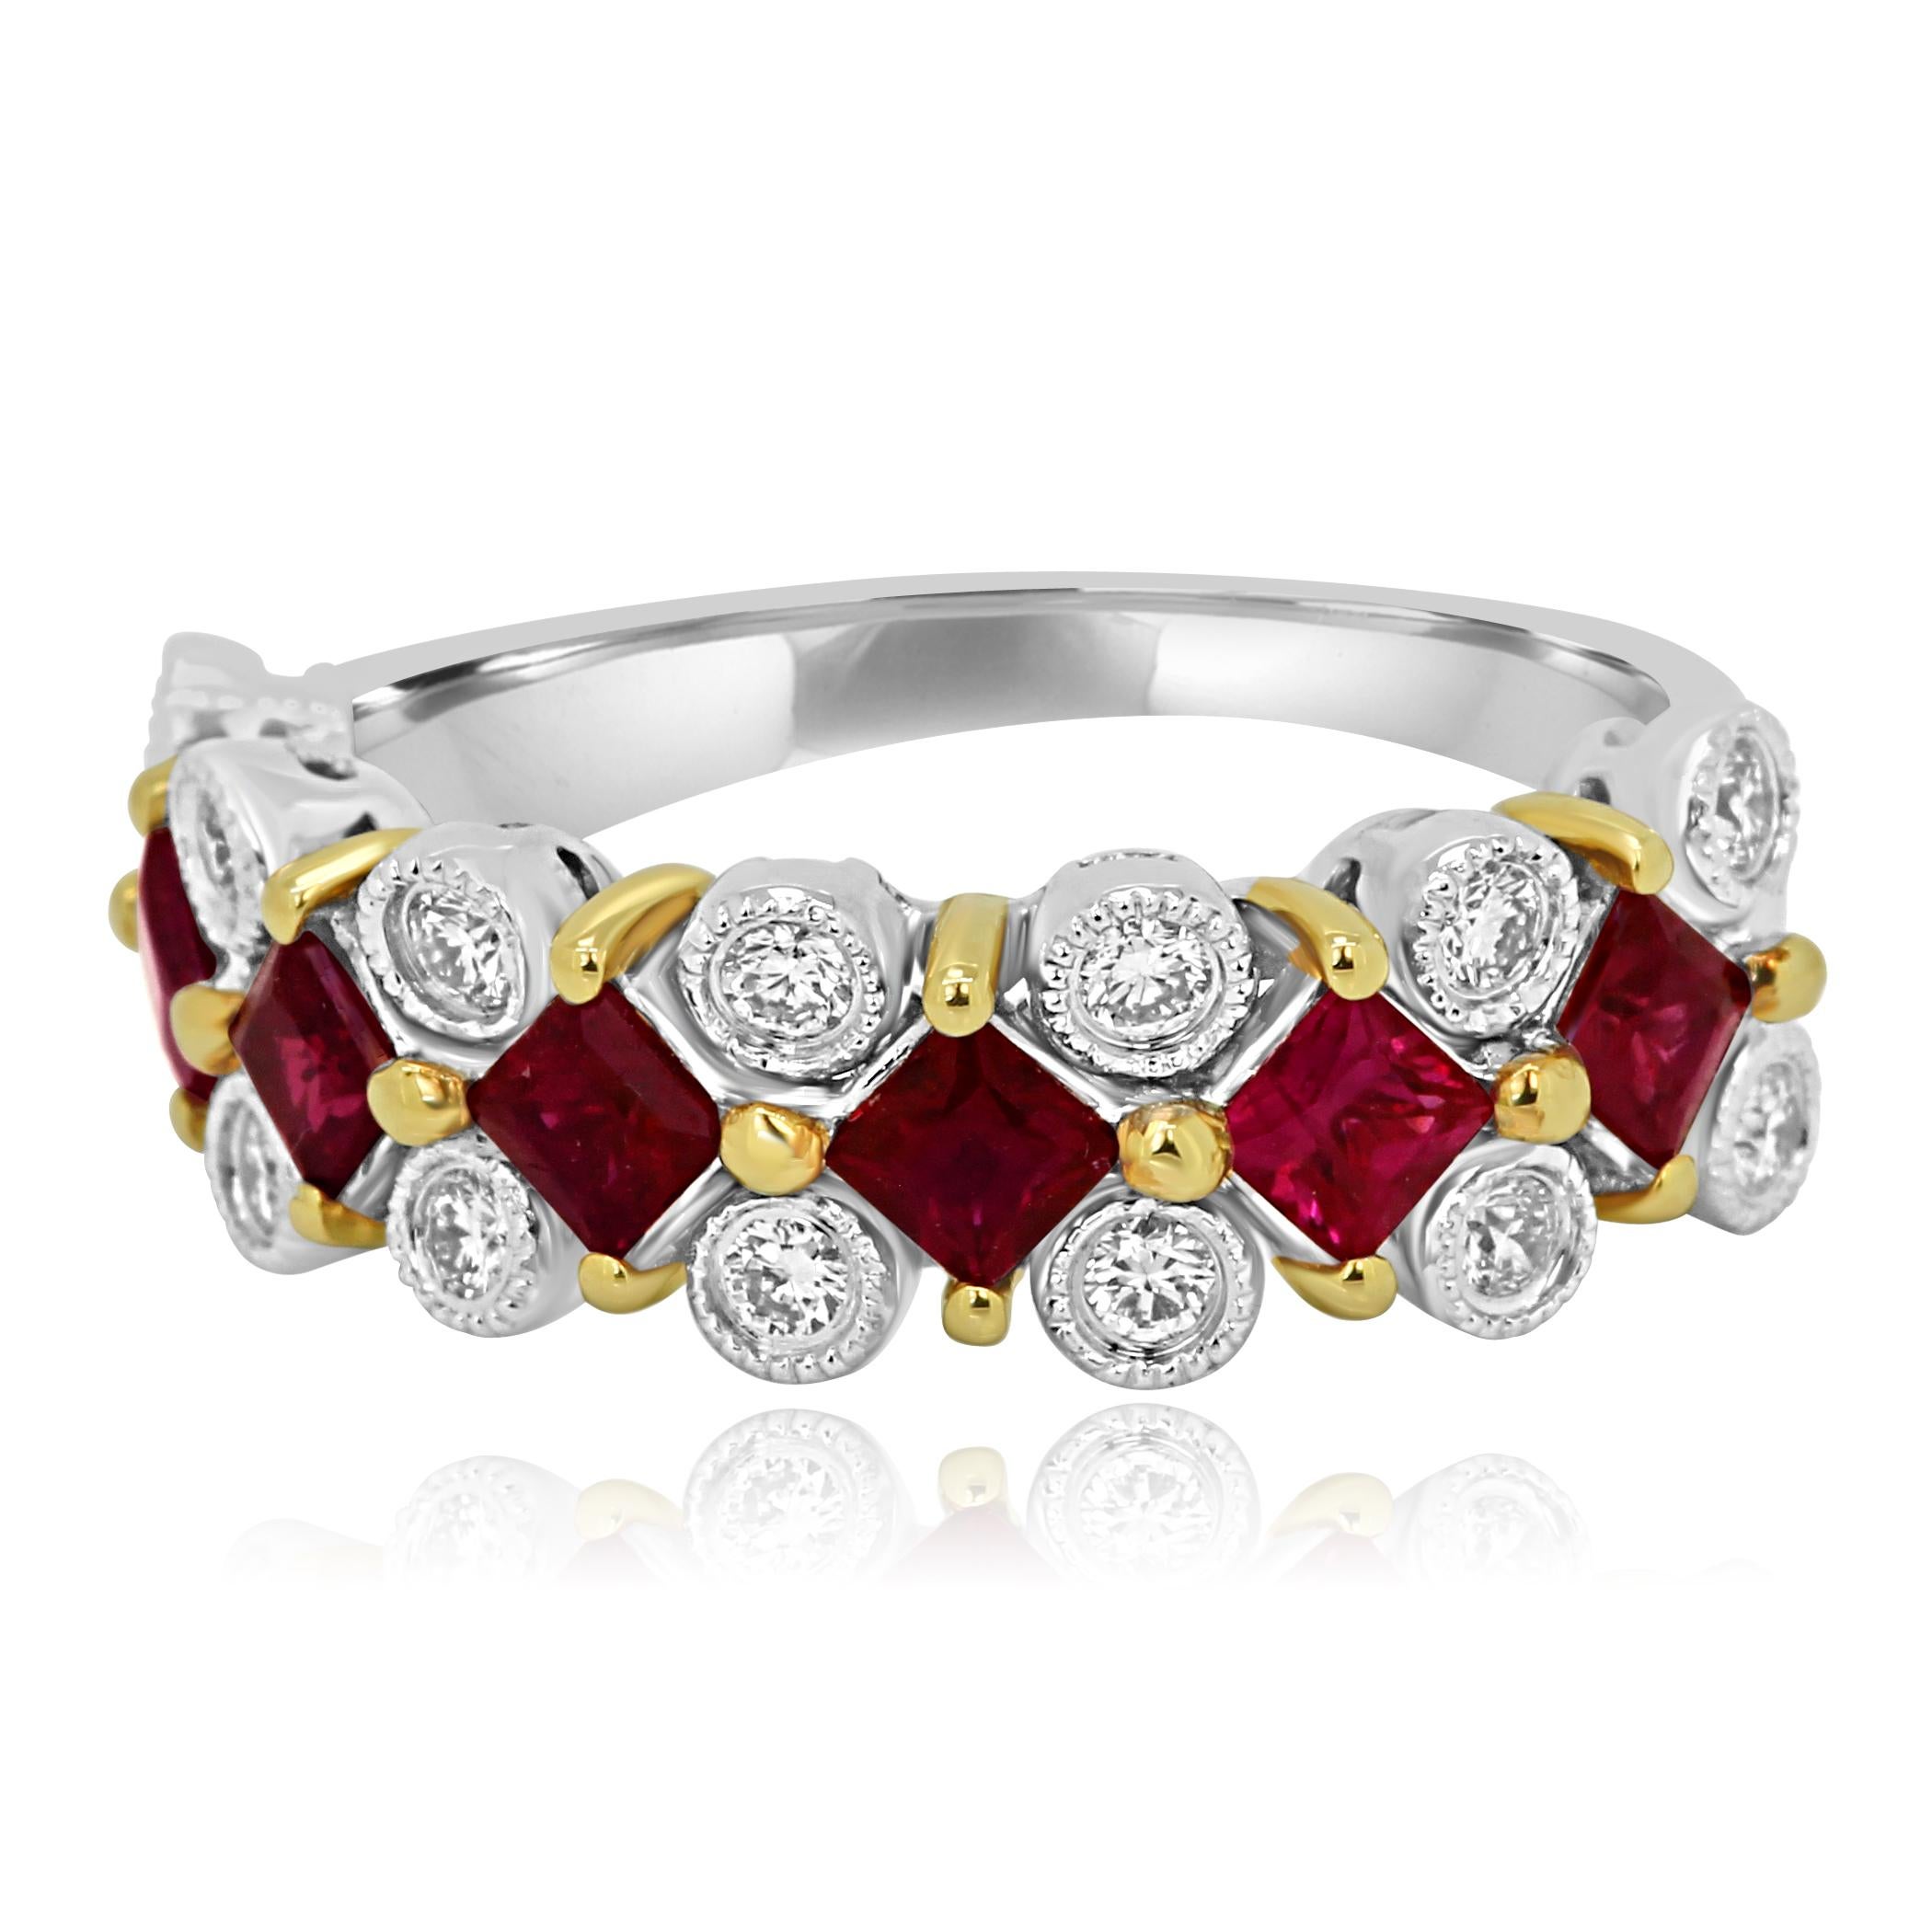 6 Ruby Princess Cut 1.05 Carat set Alongside 14 White Round Brilliant Diamonds 0.30 Carat in gorgeous 14K White and Yellow Gold Fashion, Cocktail Band Ring. 

Total Ruby Weight 1.05 Carat
Total Diamond Weight 0.30 Carat